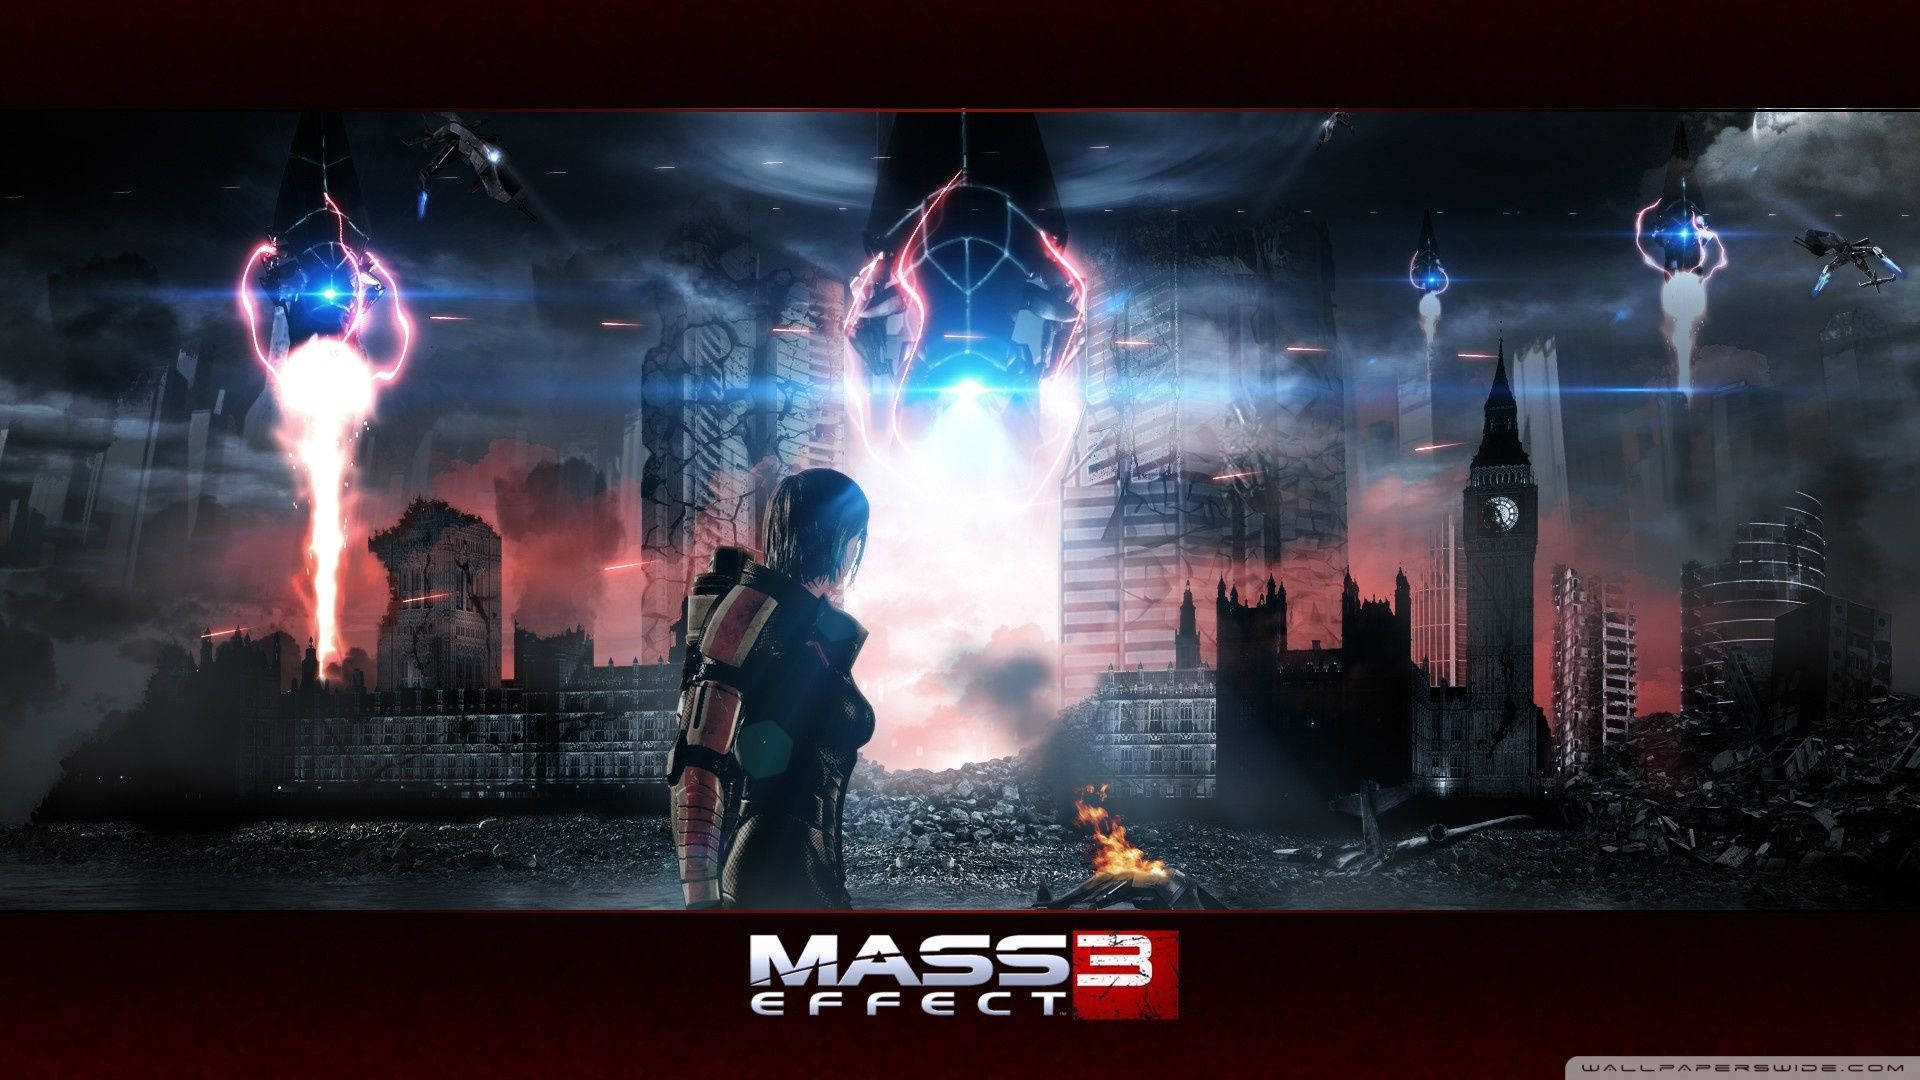 Mass Effect 3 Destroyed Buildings Background